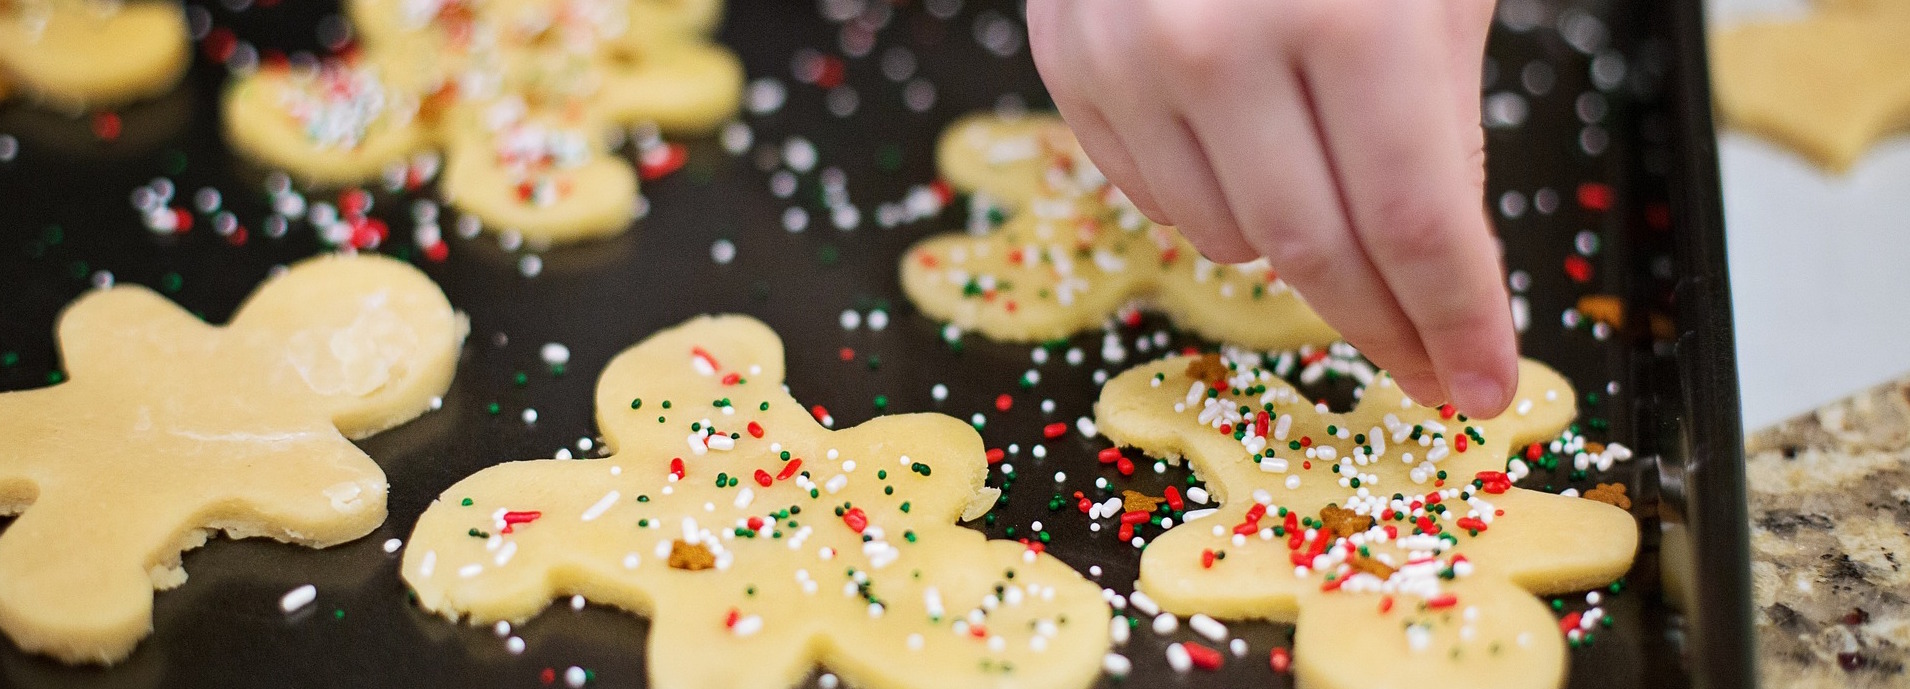 A photo of someone decorating a cookie with holiday sprinkles